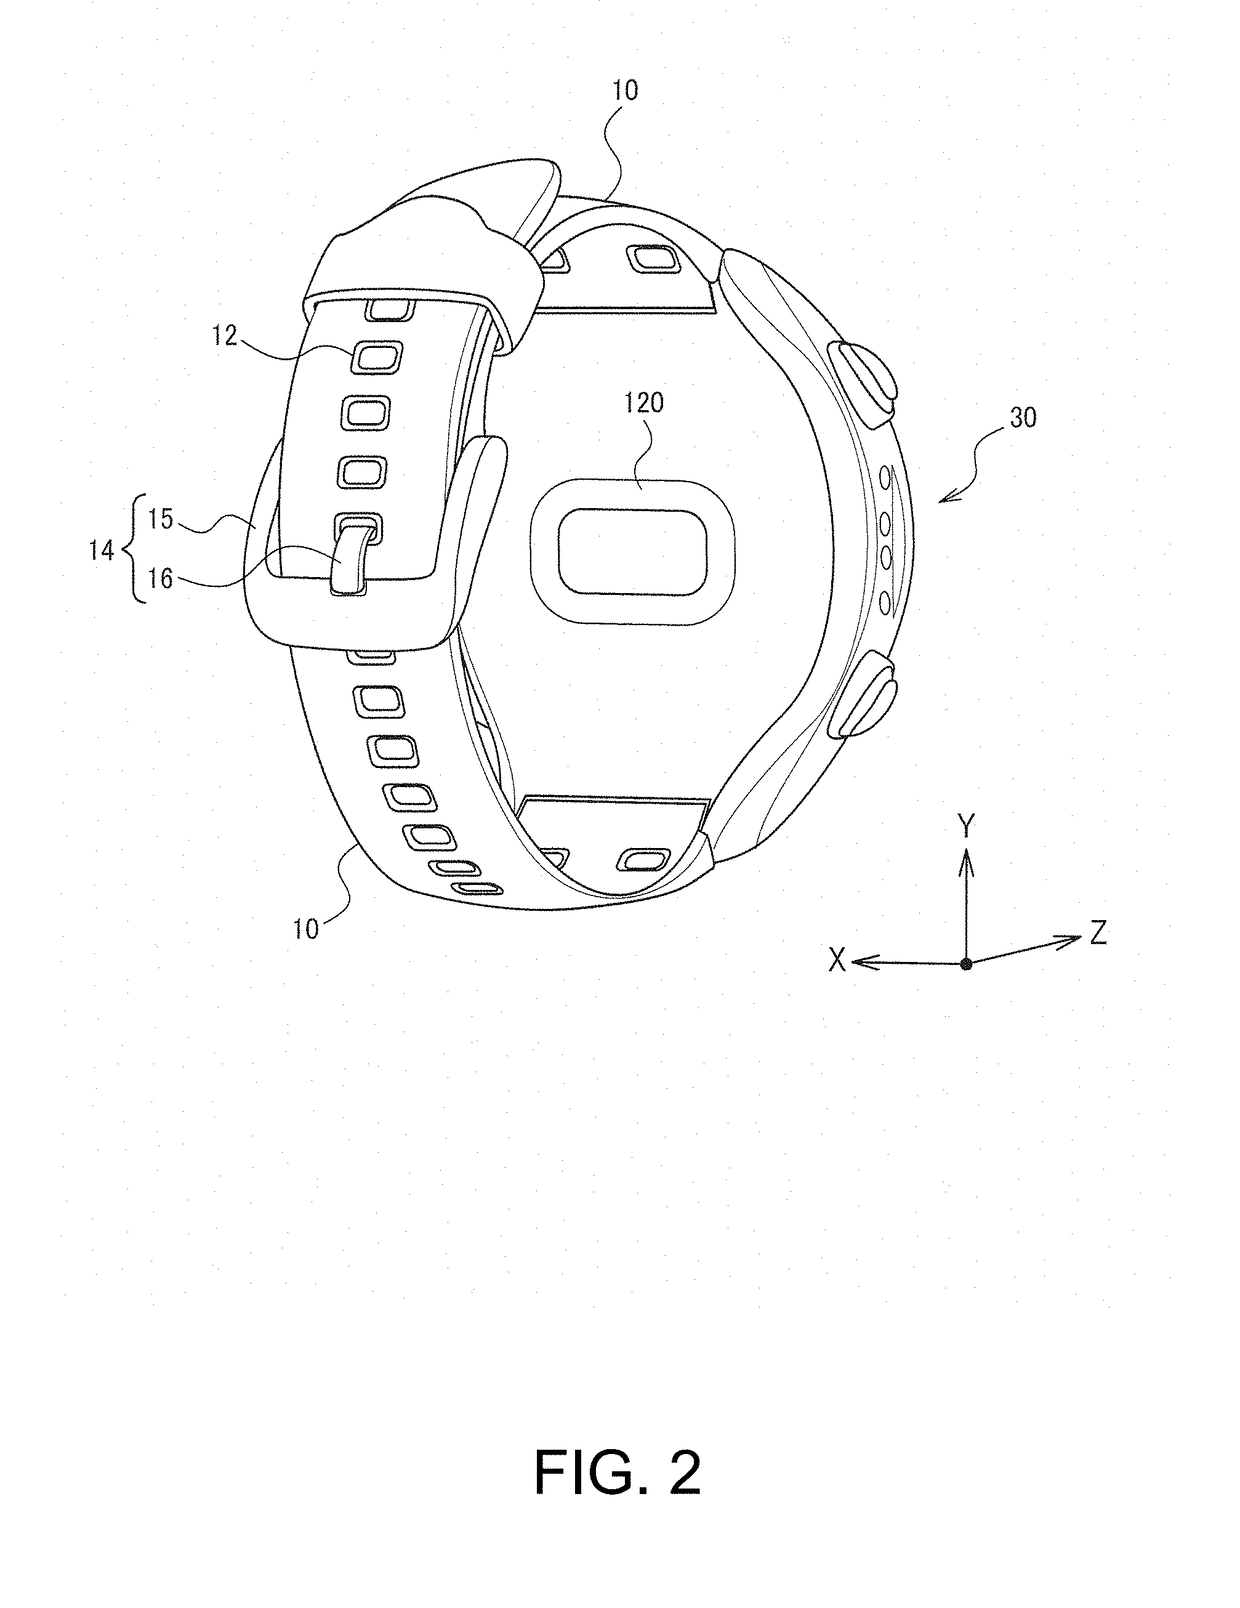 Wearable device, method for generating notification information, and system